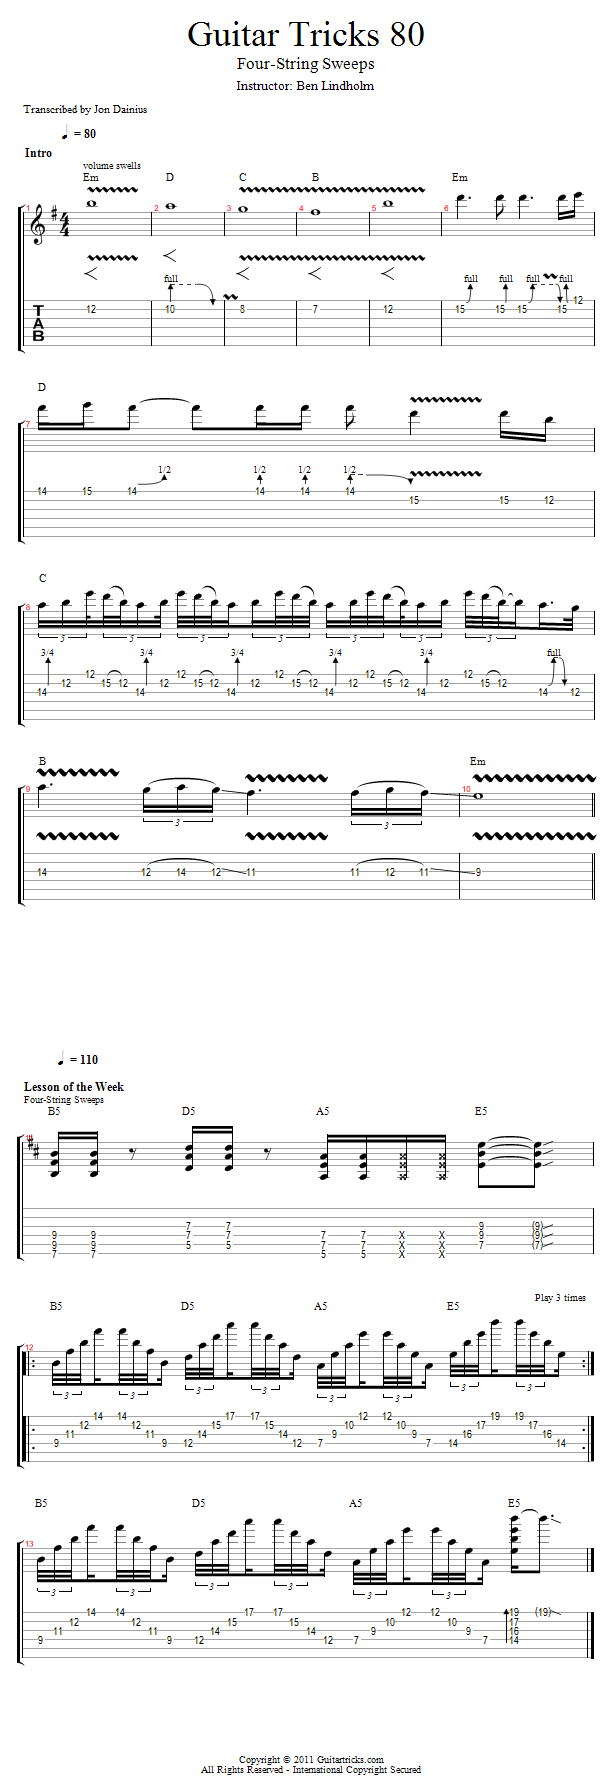 Guitar Tricks 80: 4-String Sweeps song notation